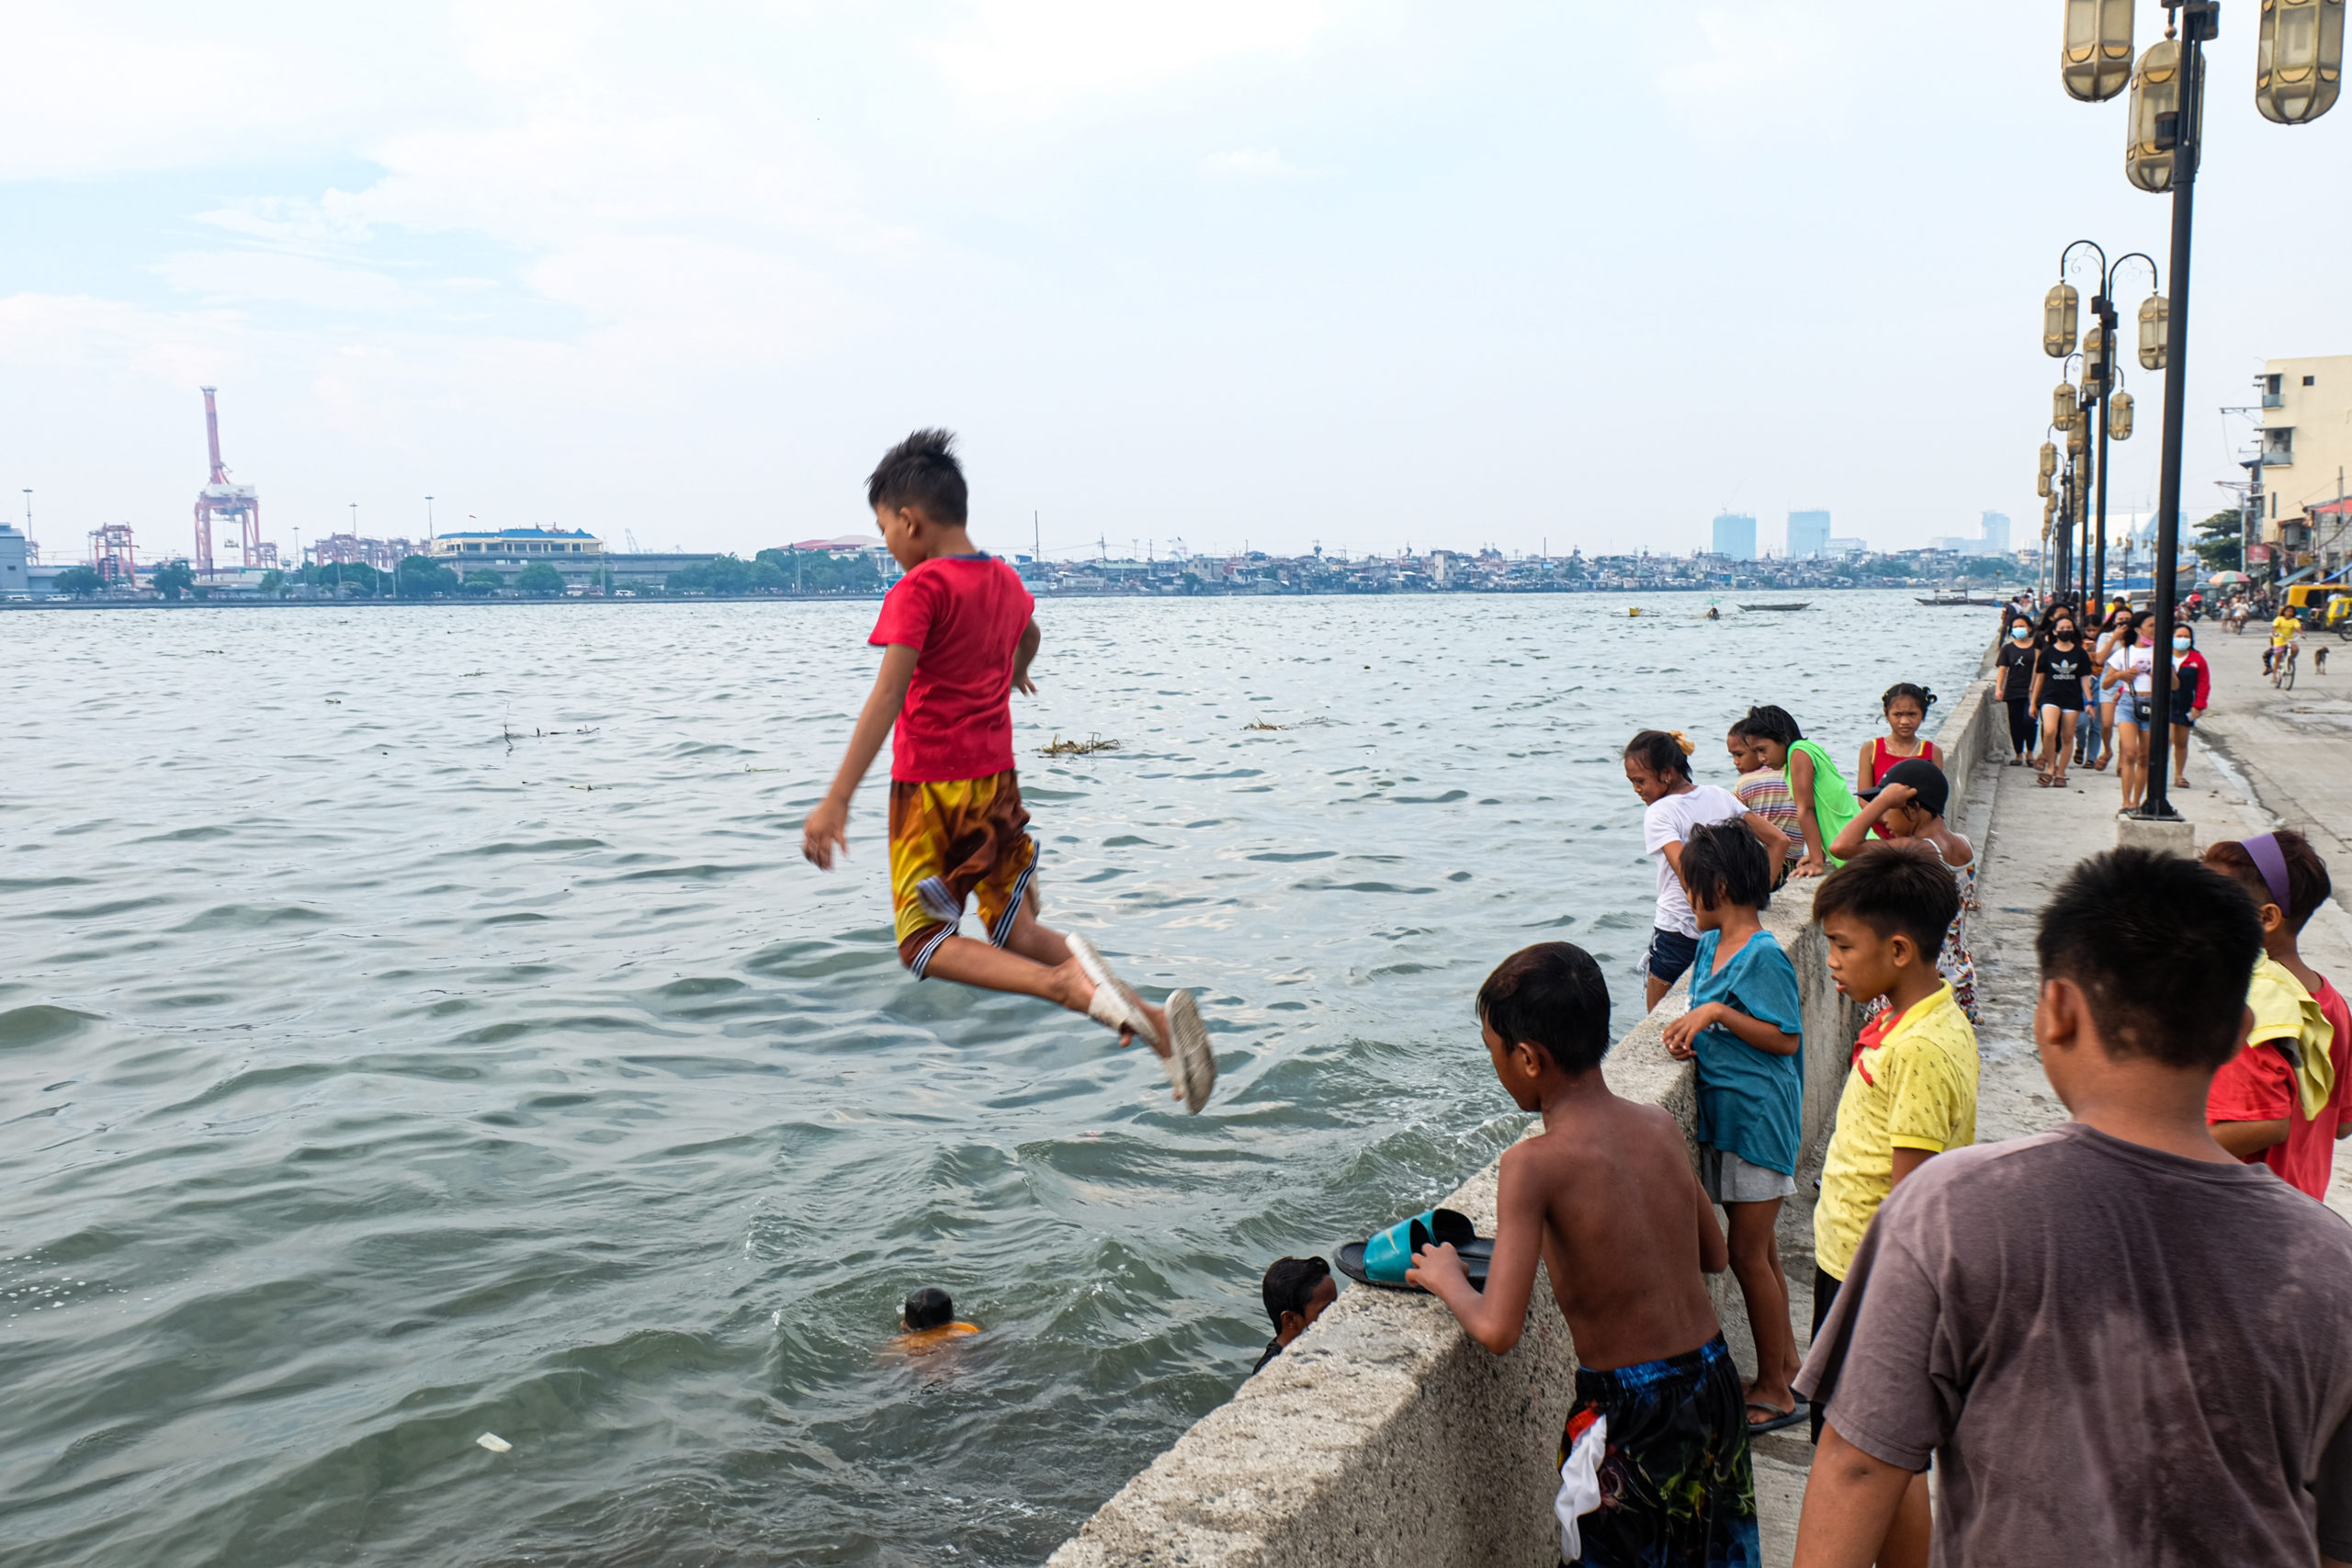 Children living near Manila Bay see no danger in living close to the sea. For many of them residing in packed communities, the water is their playground, their place for recreation.